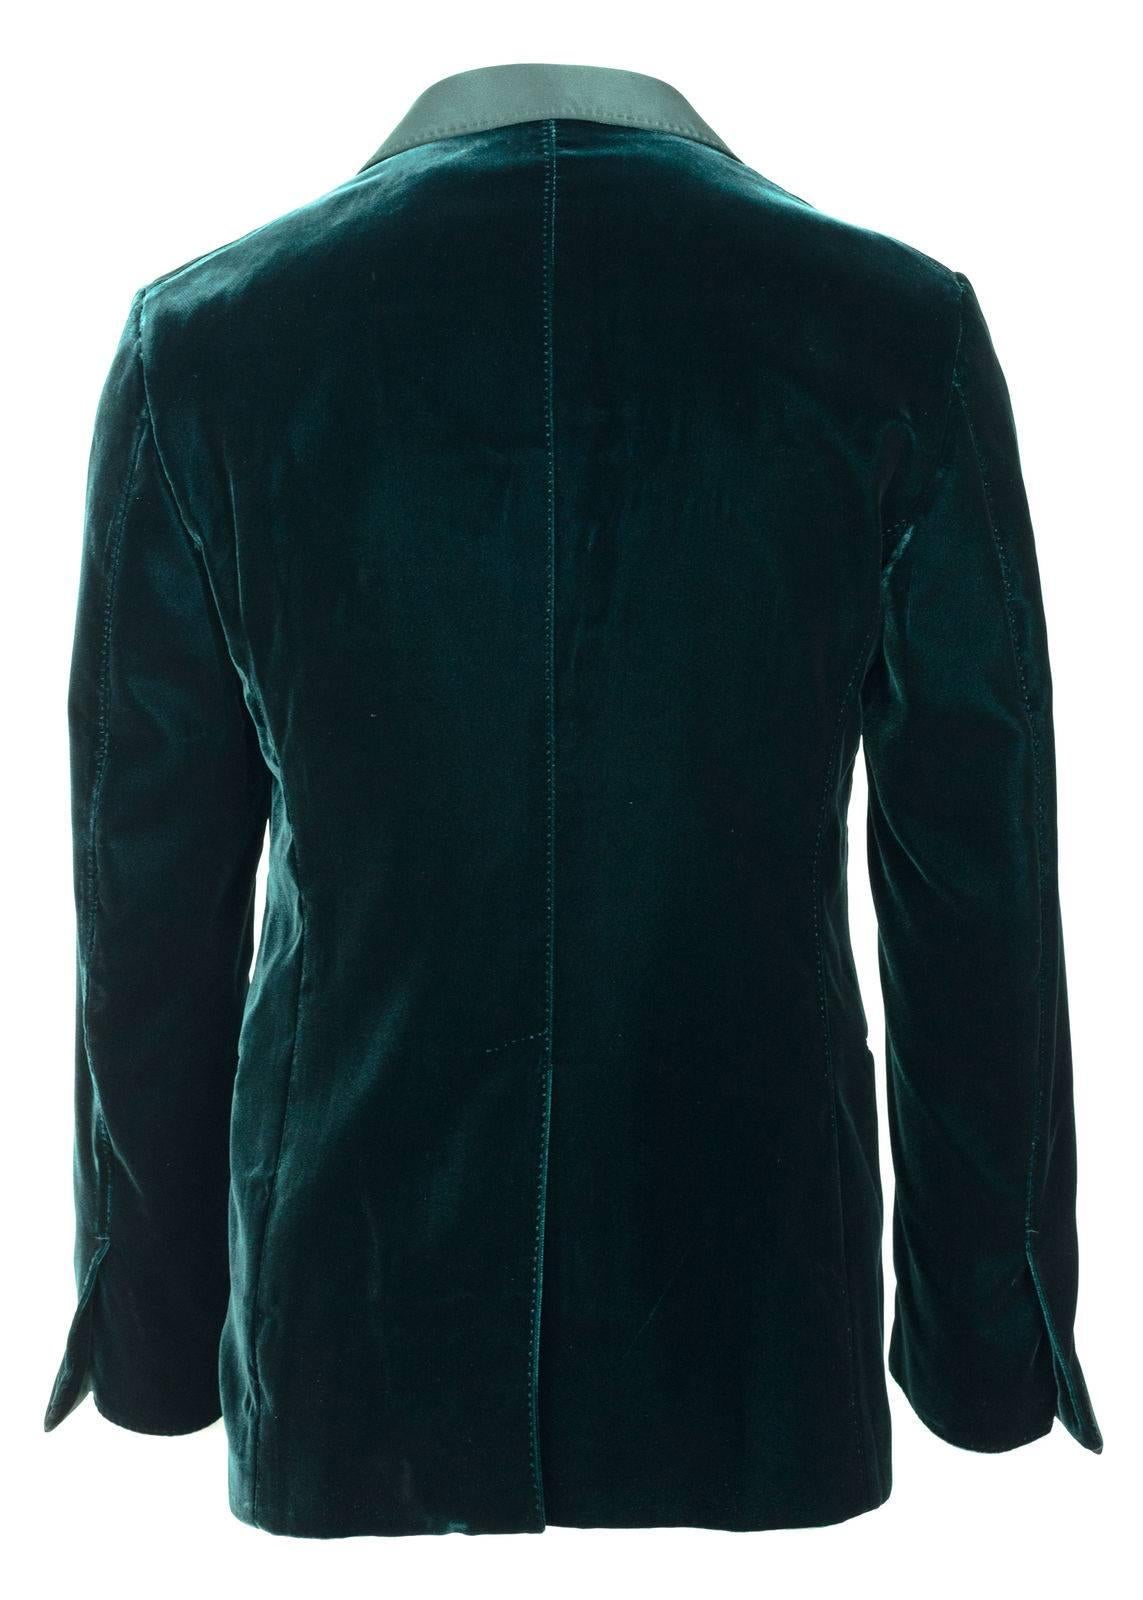 Step into the season in your Green Velvet Shelton Cocktail Jacket. This high quality piece features classic Sumptuous Cocktail Jacekt with a Vibrant Velvet Base and Tonal Satin Shawl Collar and Cuffs. The Style Features a center Vent and a one